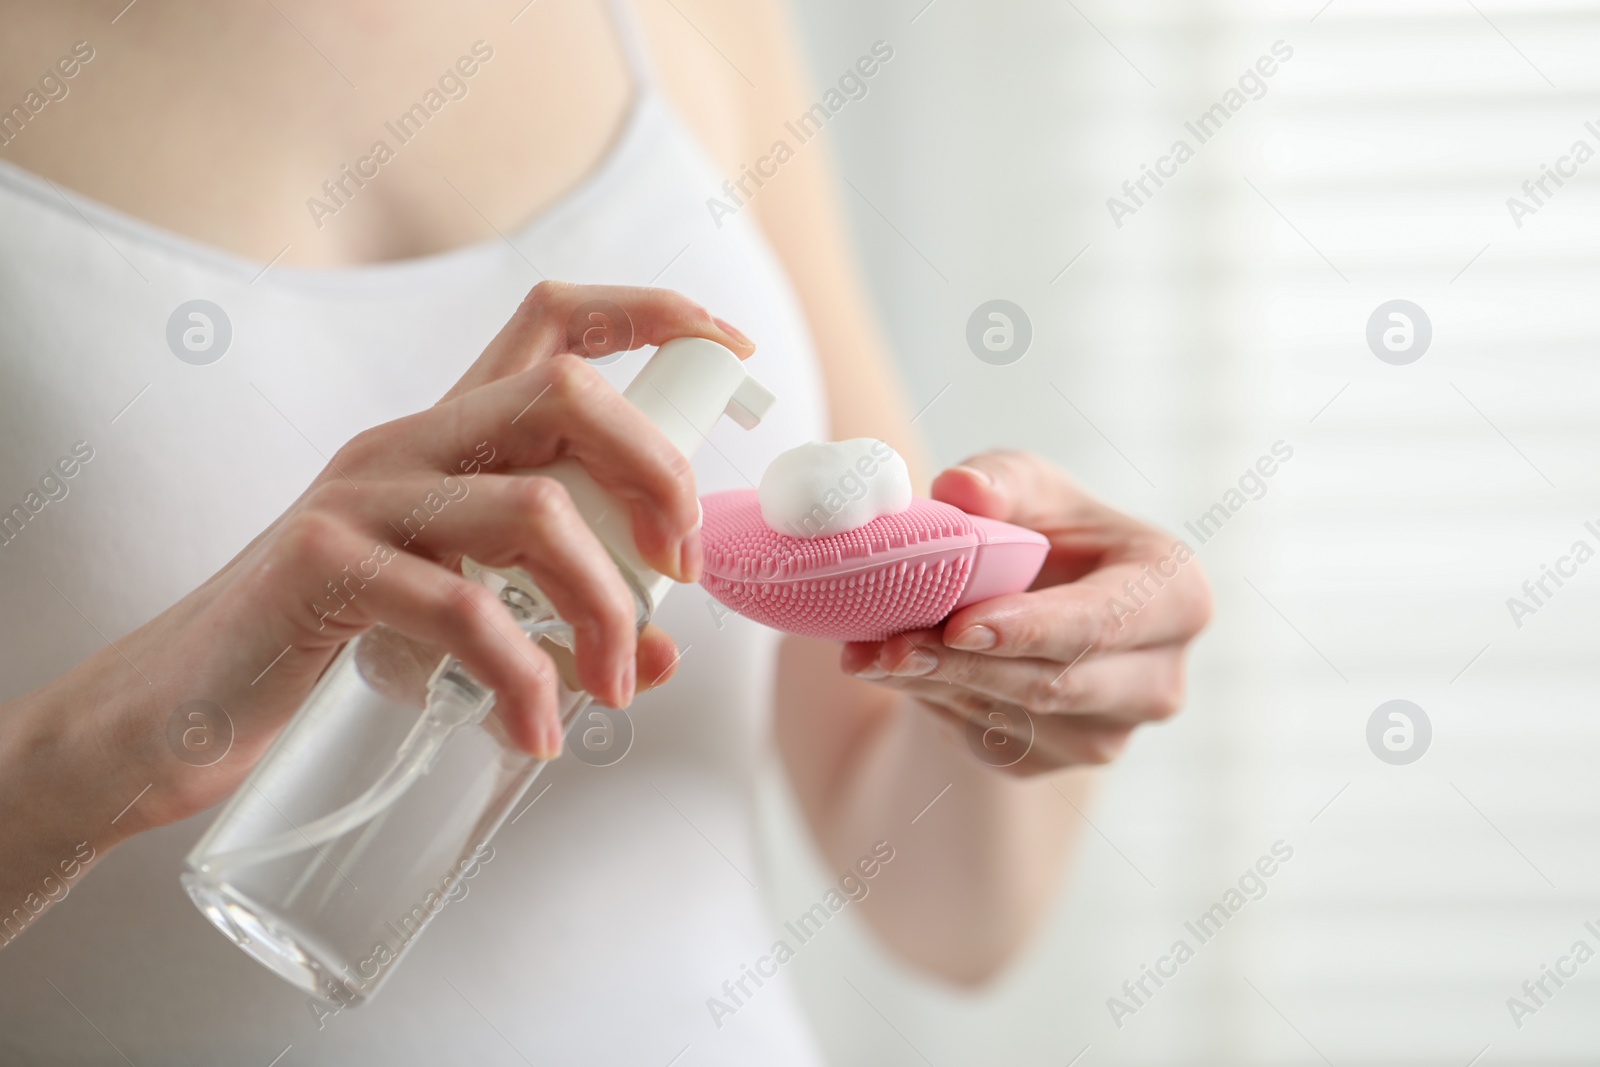 Photo of Washing face. Woman applying cleansing foam onto brush against light background, closeup. Space for text